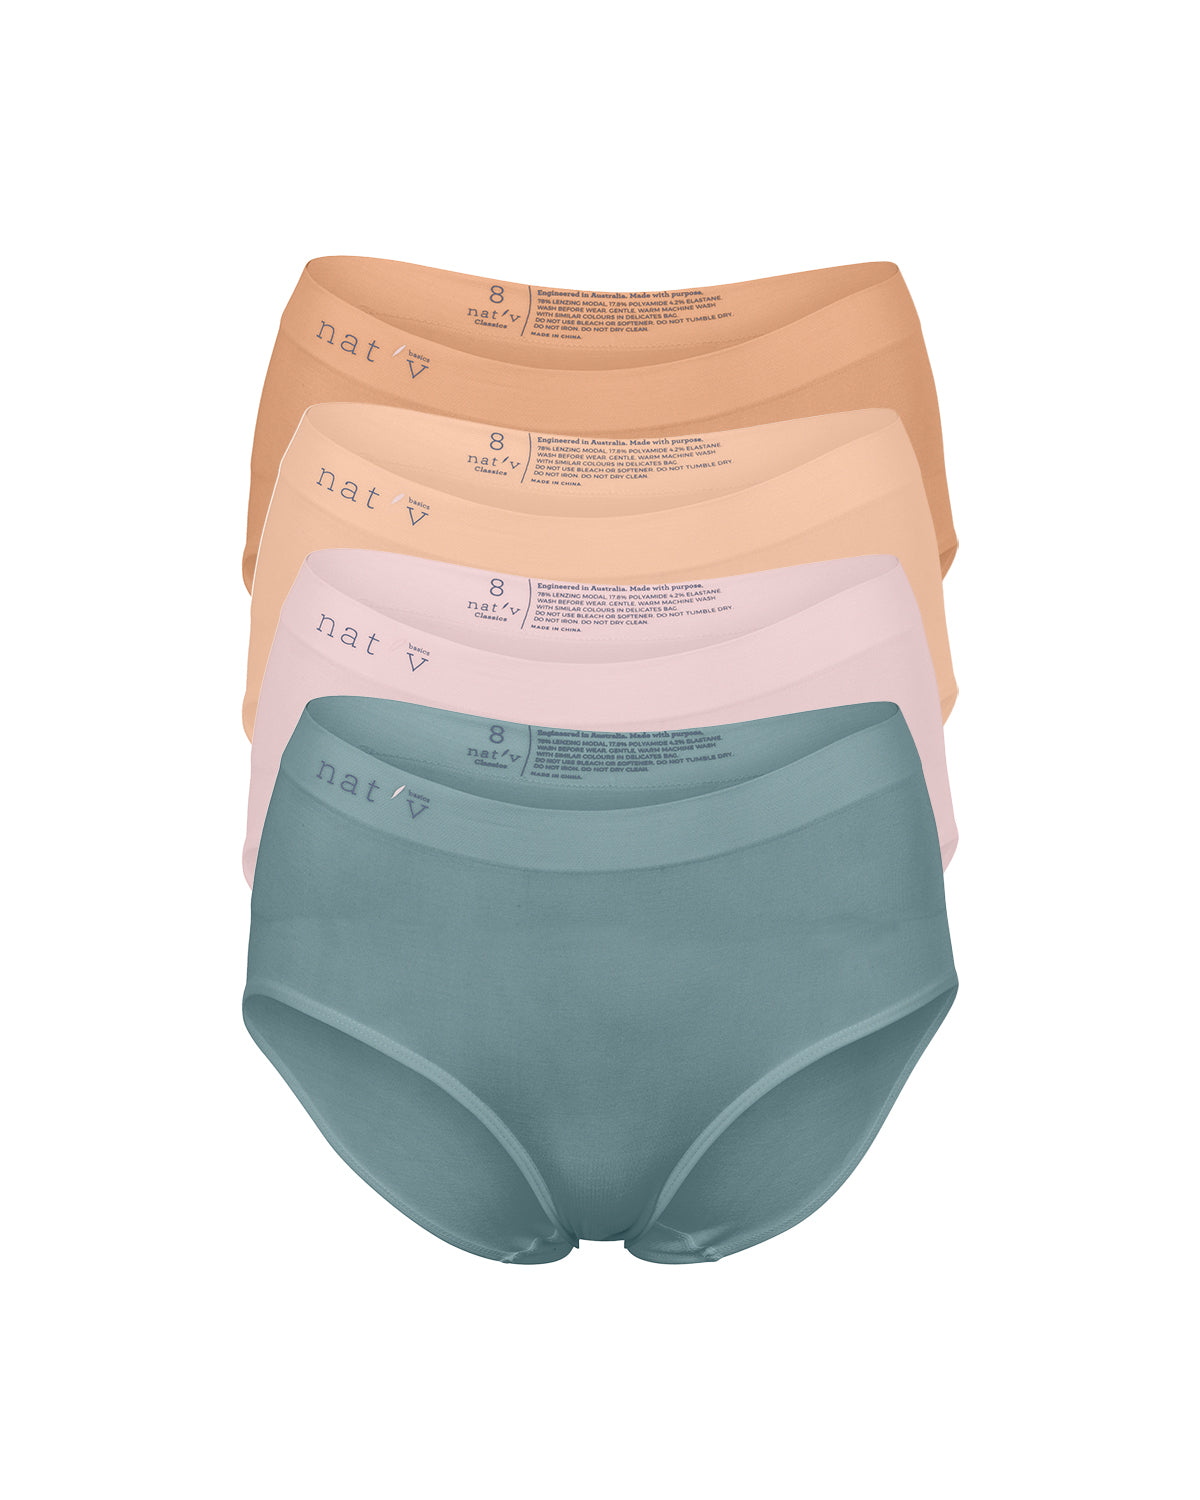 Find Delicates Brand Underwear For Ultimate Comfort And Cuteness